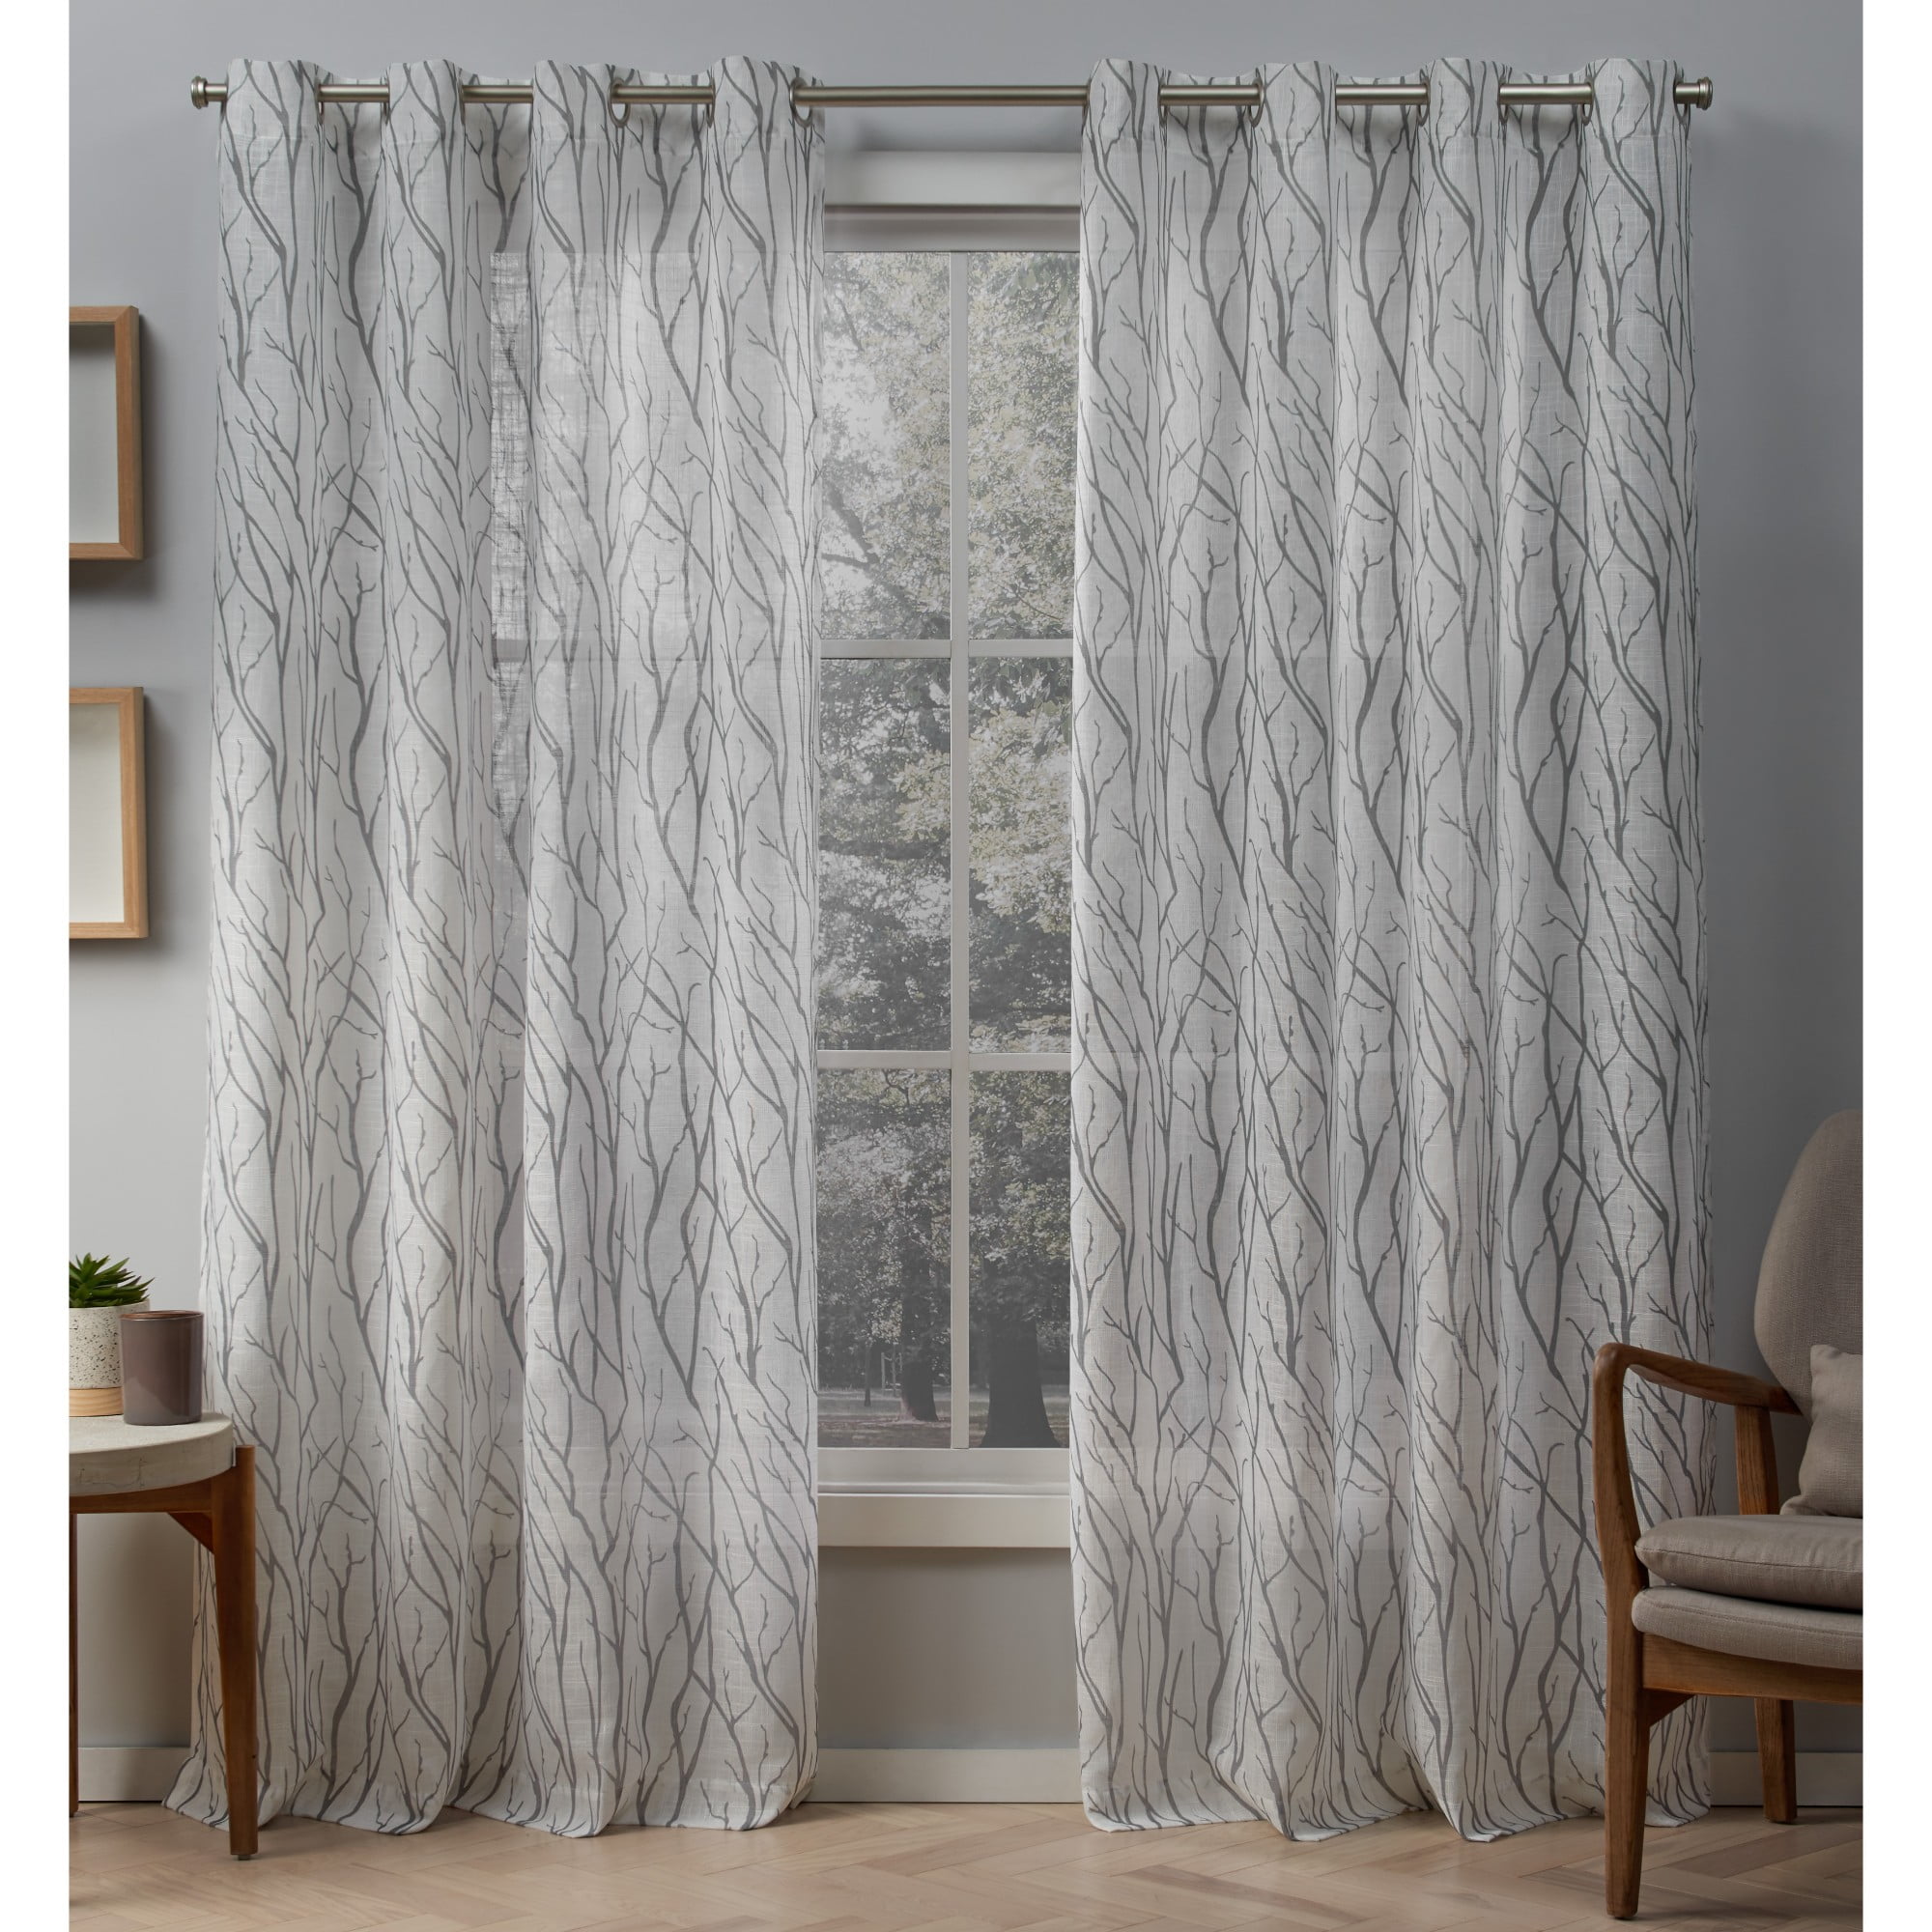 Exclusive Home Curtains EH8039-01 2-96G Rio Burnout Sheer Grommet Top Curtain Panel Pair Winter White 2 Piece 54x96